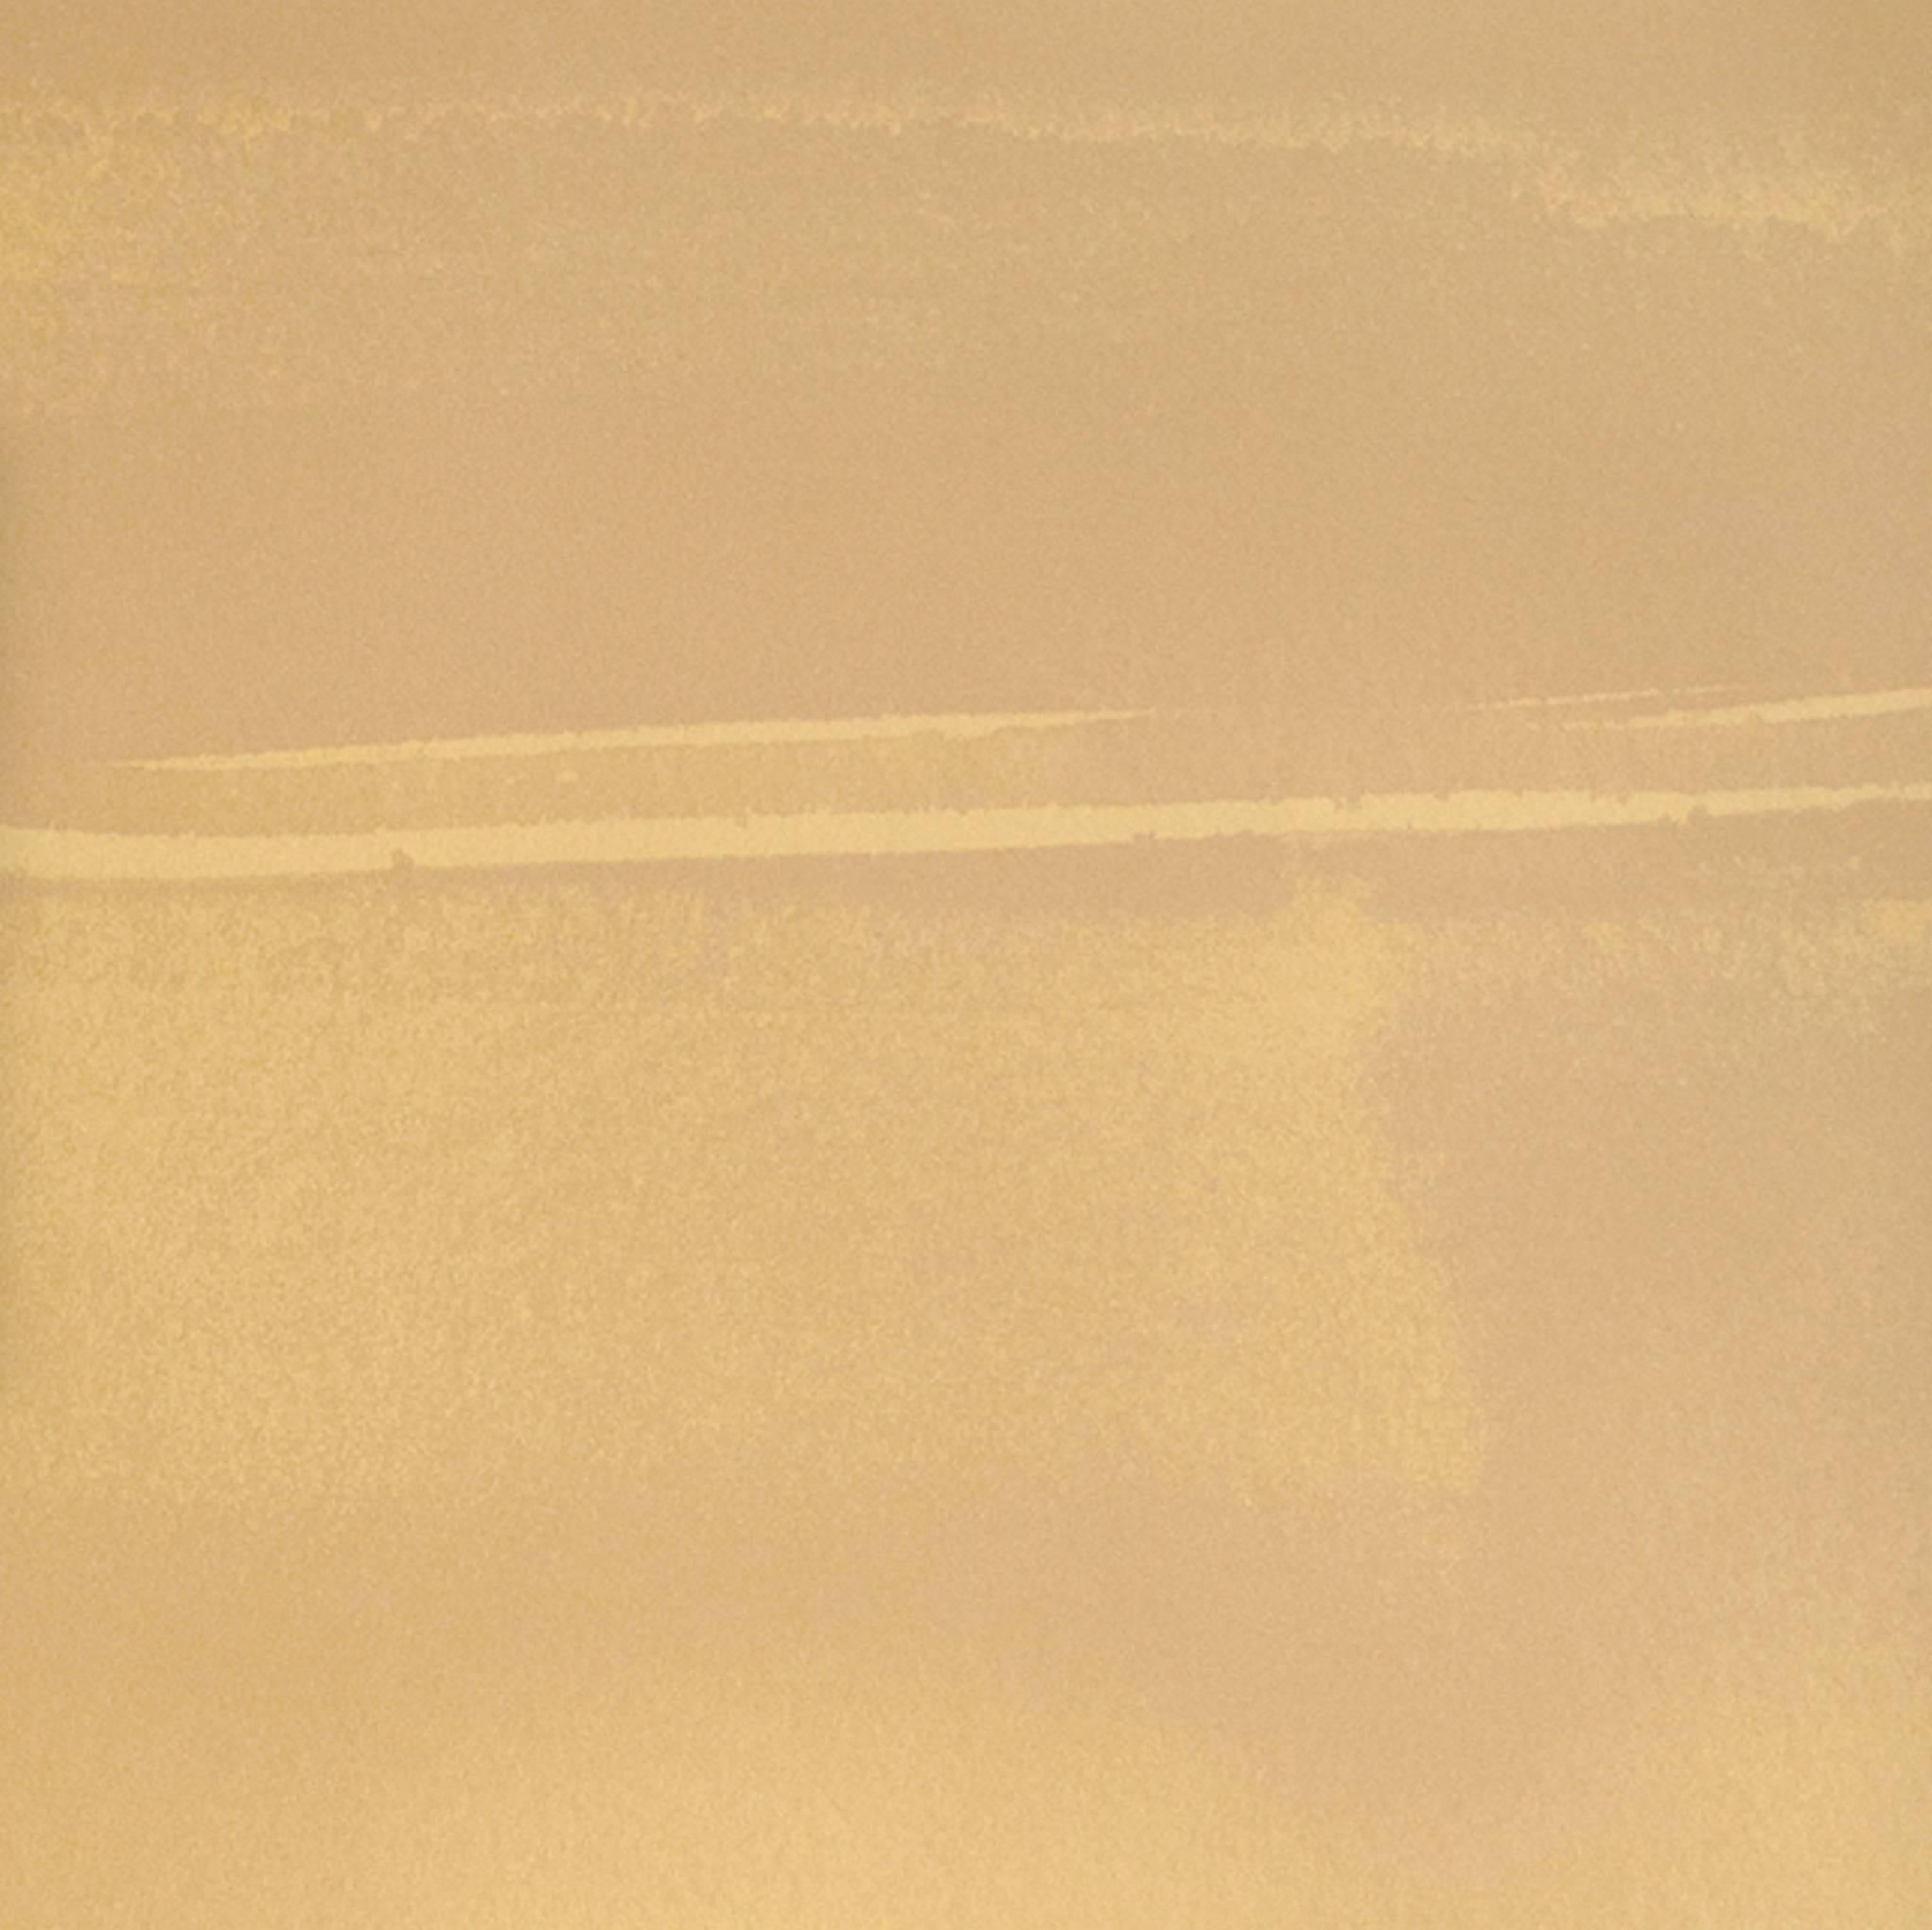 Cirrus Horizon Wallpaper or Wall Mural in Dusty Gold Metallic For Sale